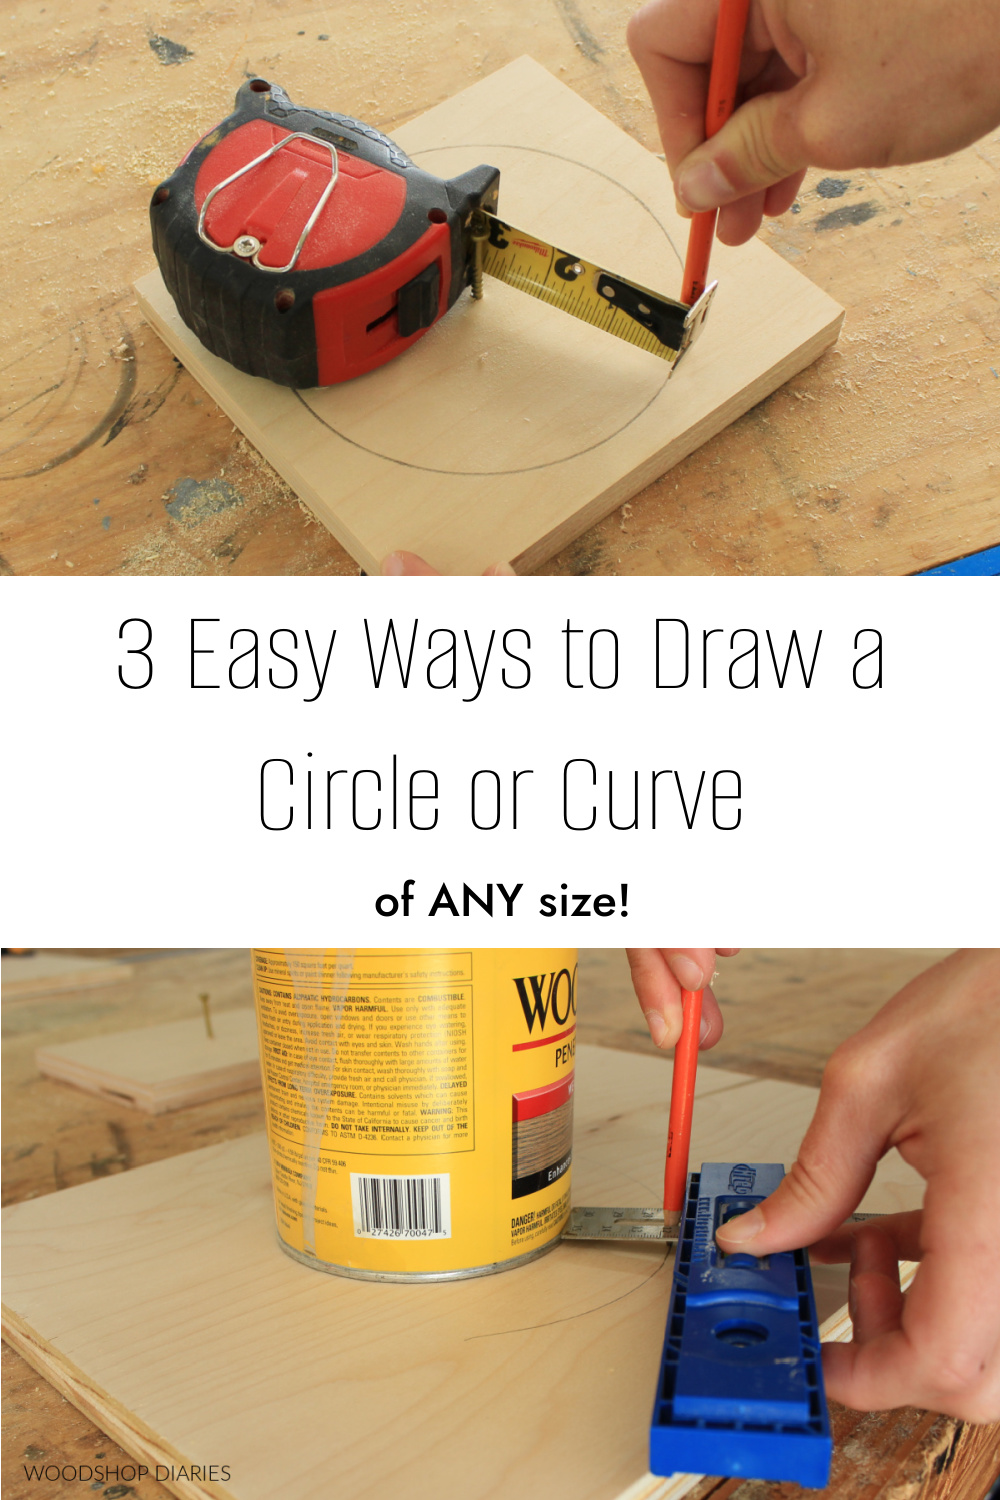 Pinterest collage image showing using tape measure to draw circle at top and using Kreg MultiMark tool to draw circle at bottom with text "3 easy ways to draw a circle or curve of any size"